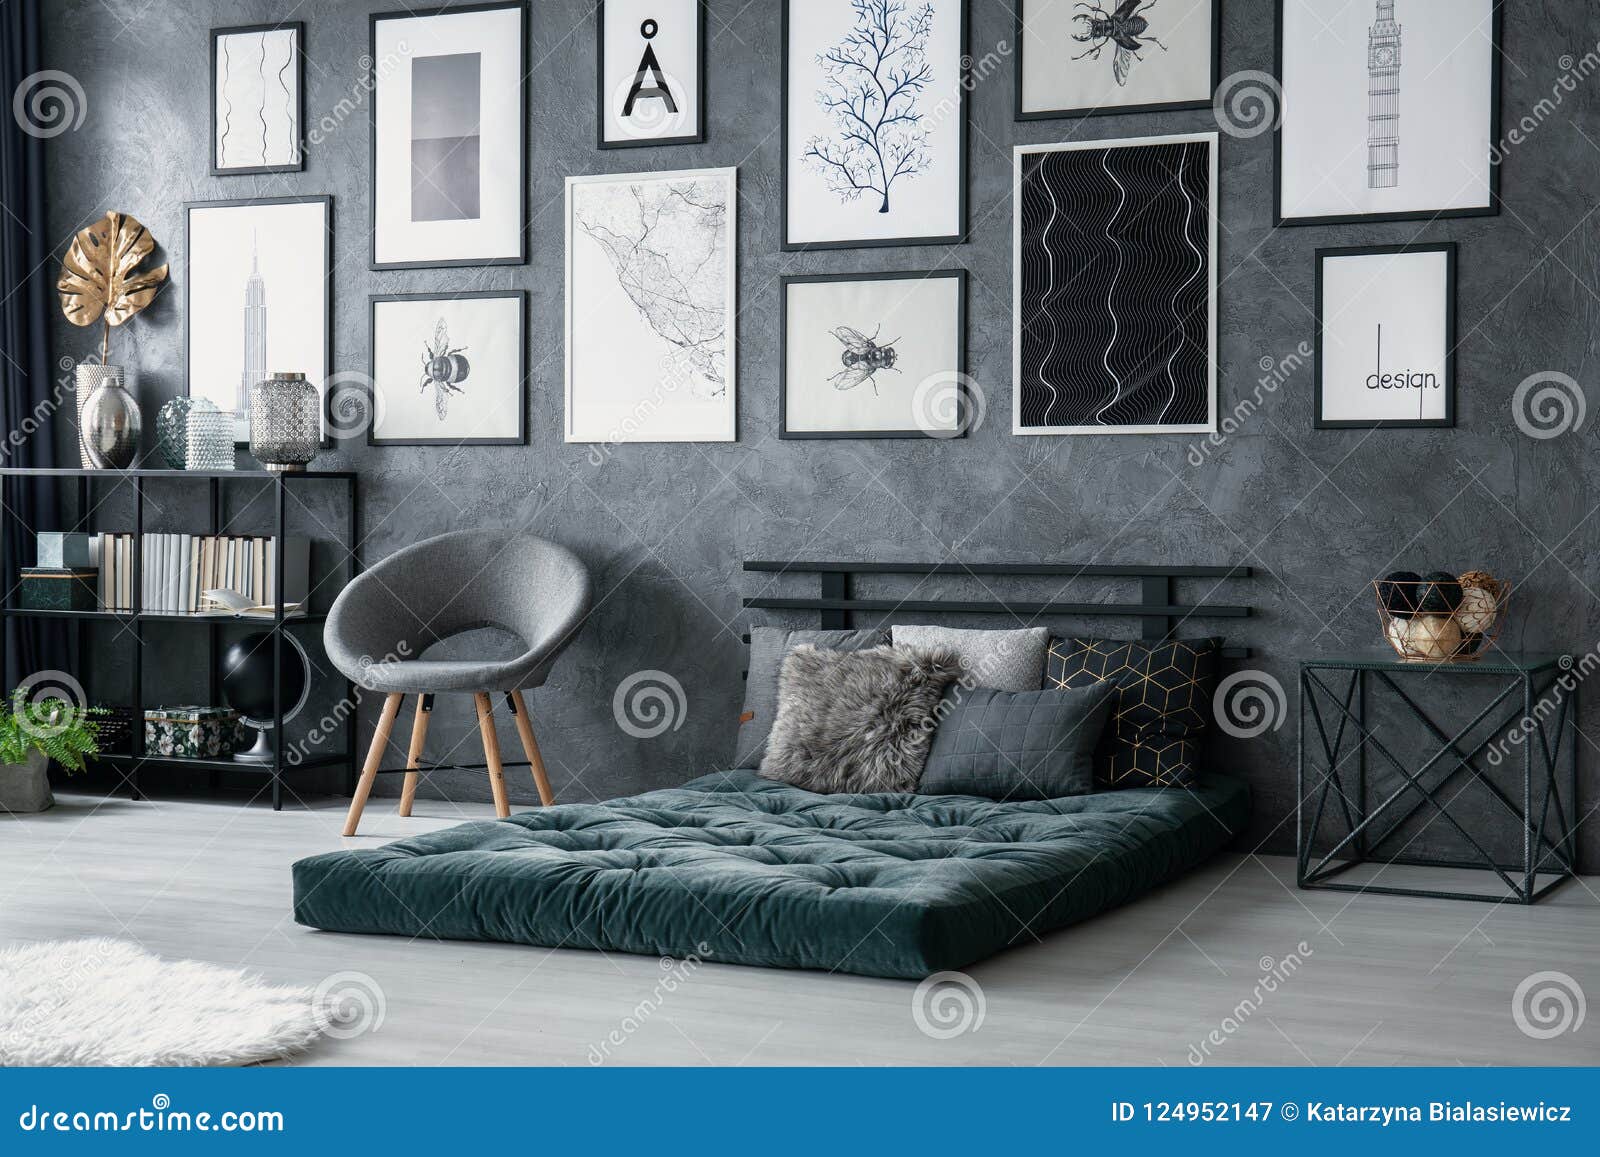 grey armchair next to green mattress in bedroom interior with gallery of posters. real photo